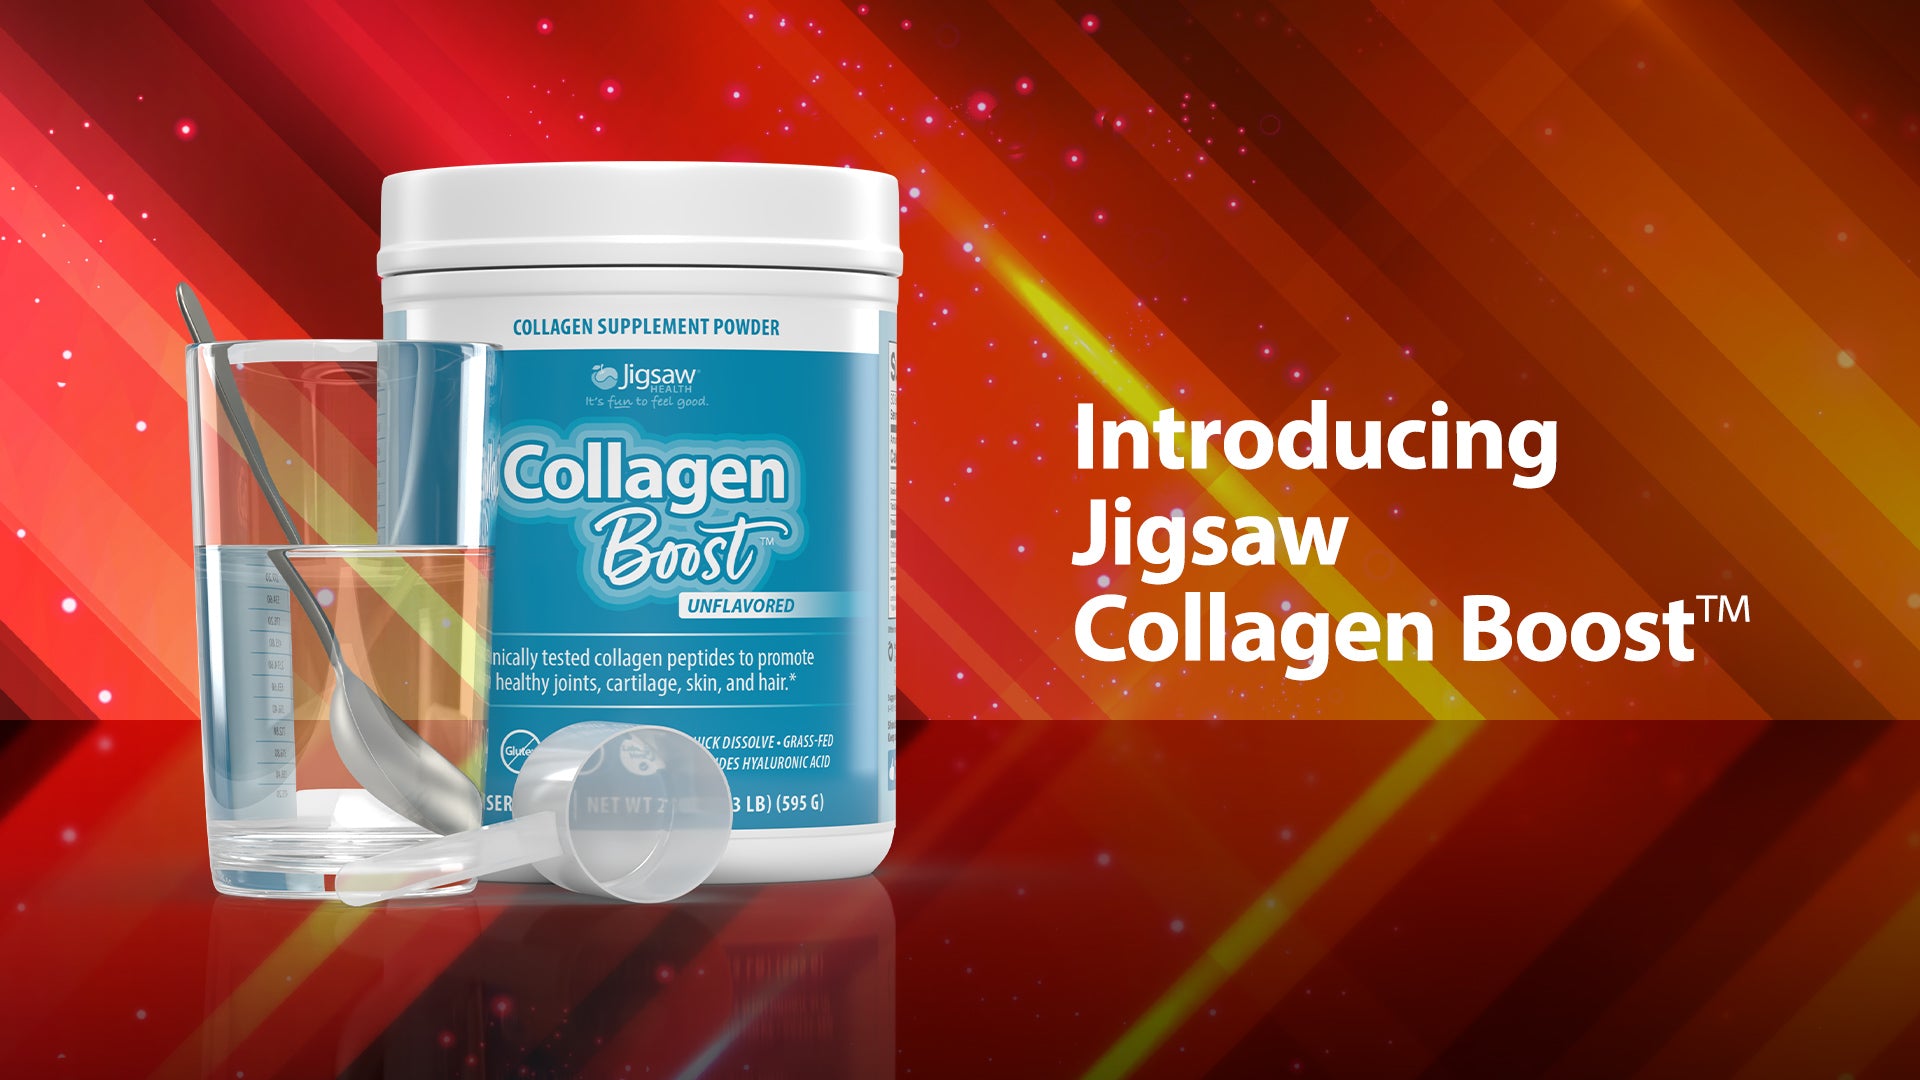 Introducing the NEW Jigsaw Collagen Boost™… NOW AVAILABLE!